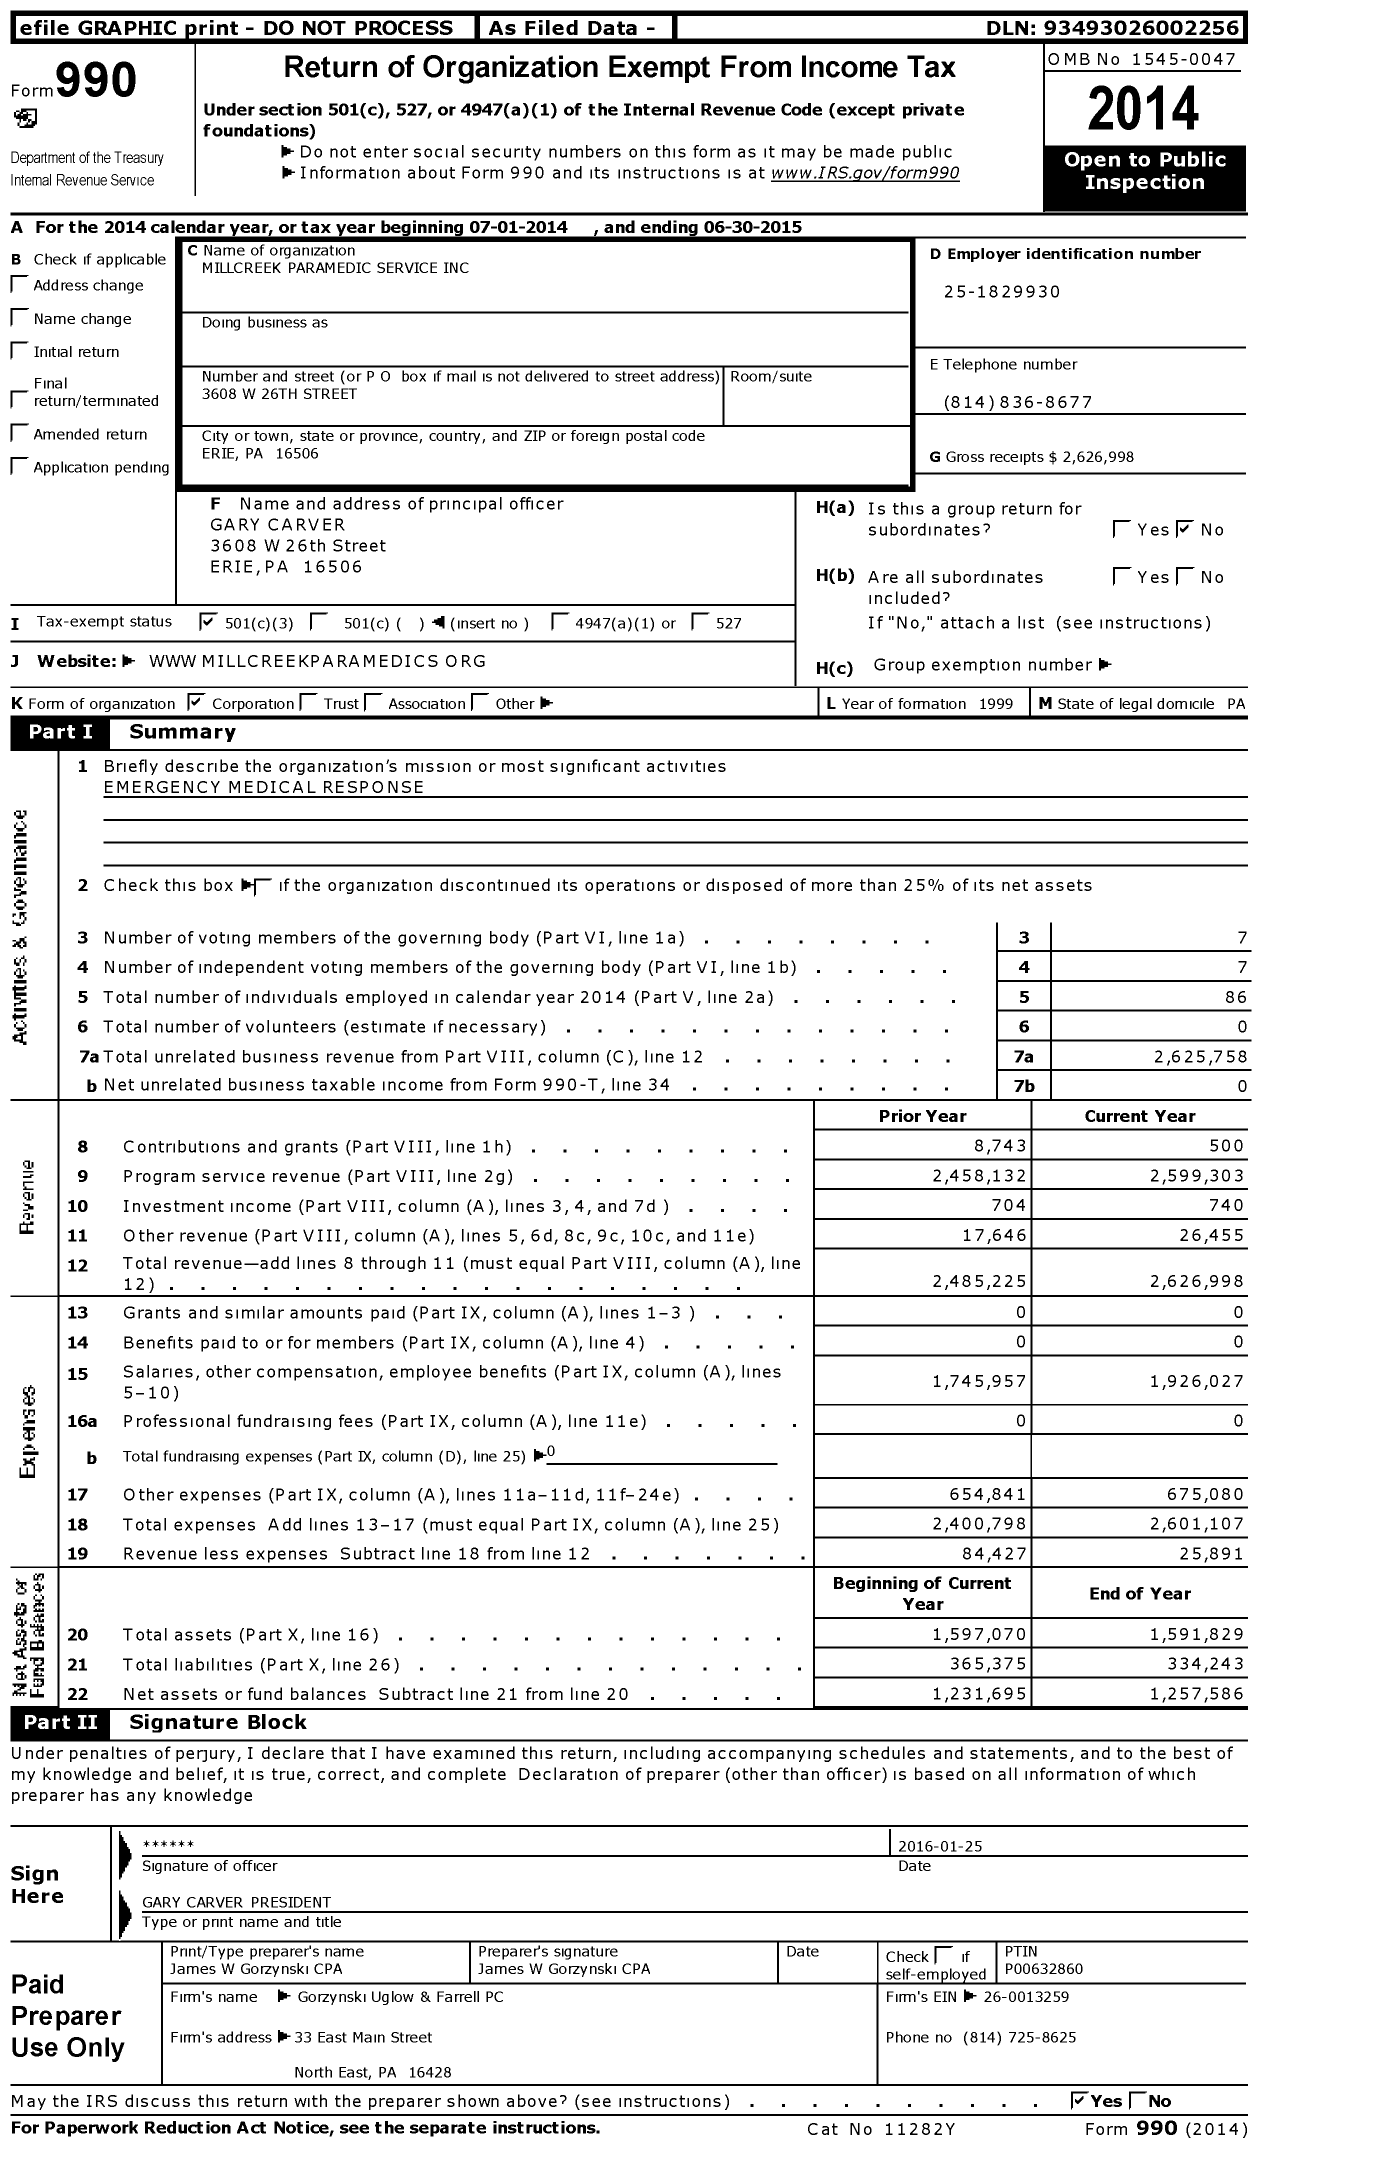 Image of first page of 2014 Form 990 for Millcreek Paramedic Services (MPS)